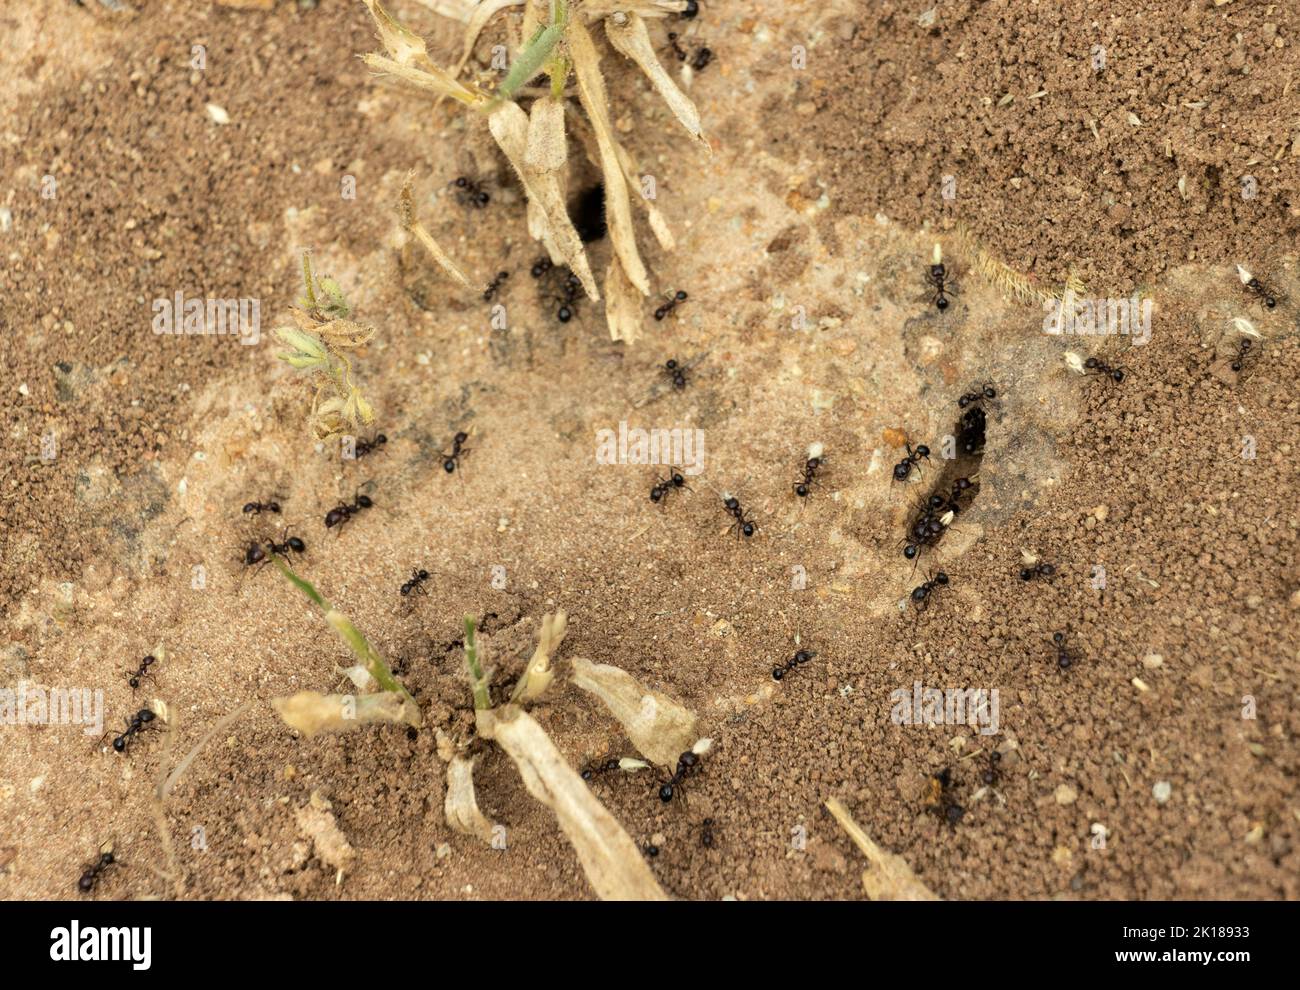 During the rains countless worker Harvester Ants scour the veld collecting grass seeds. The food is stored for the dry season but during  inactivity Stock Photo